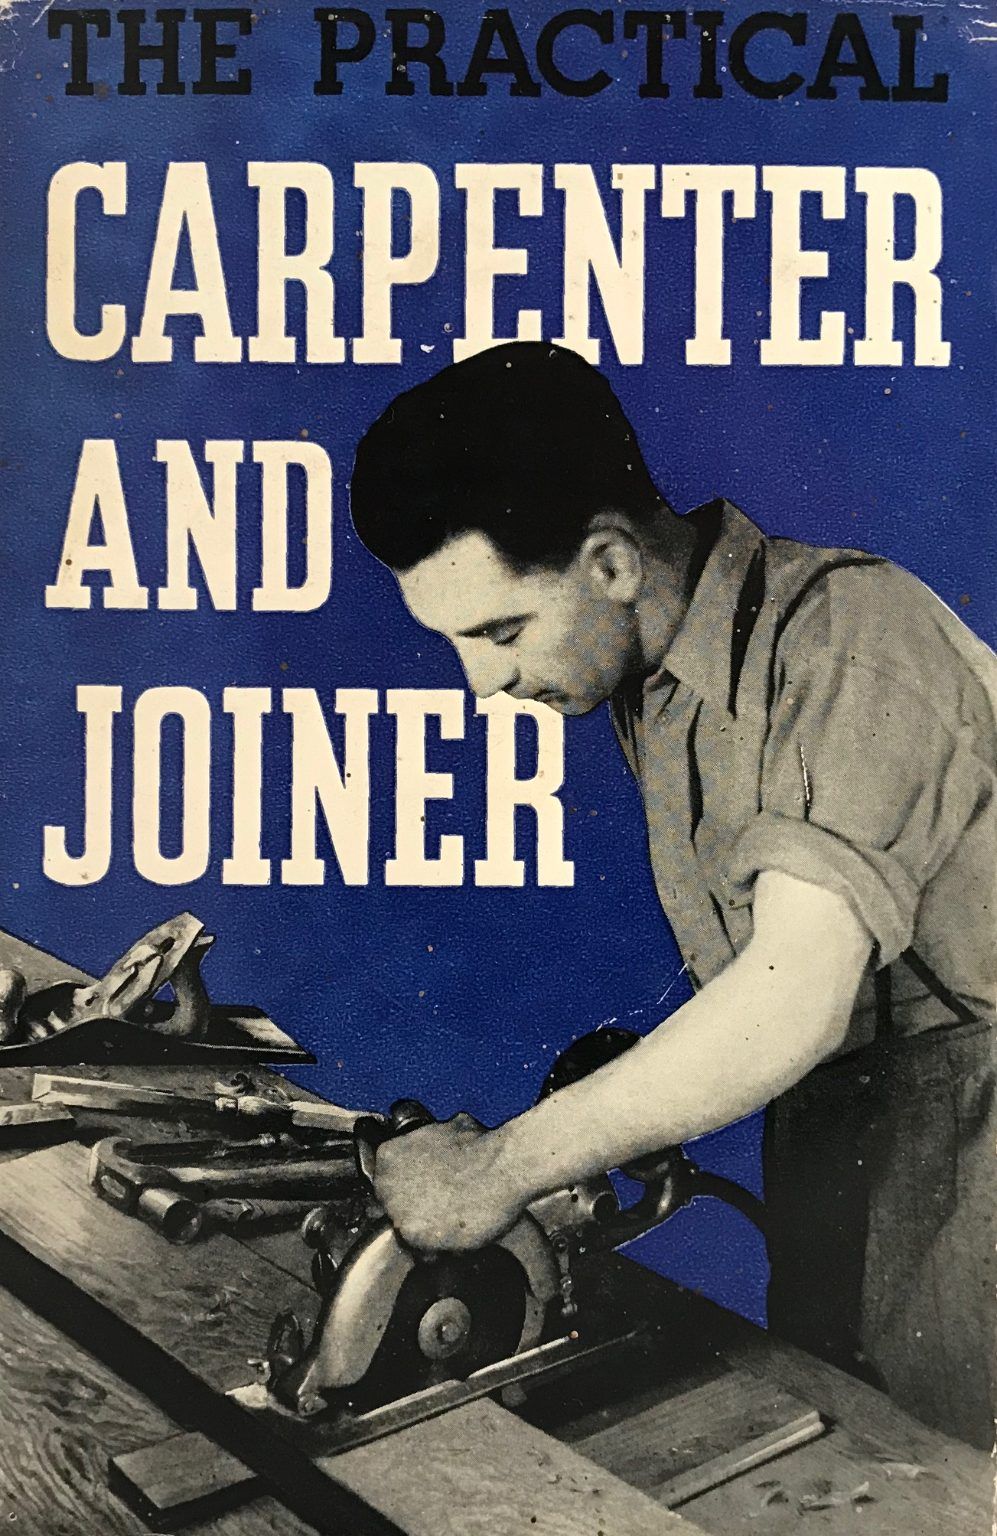 THE PRACTICAL CARPENTER AND JOINER